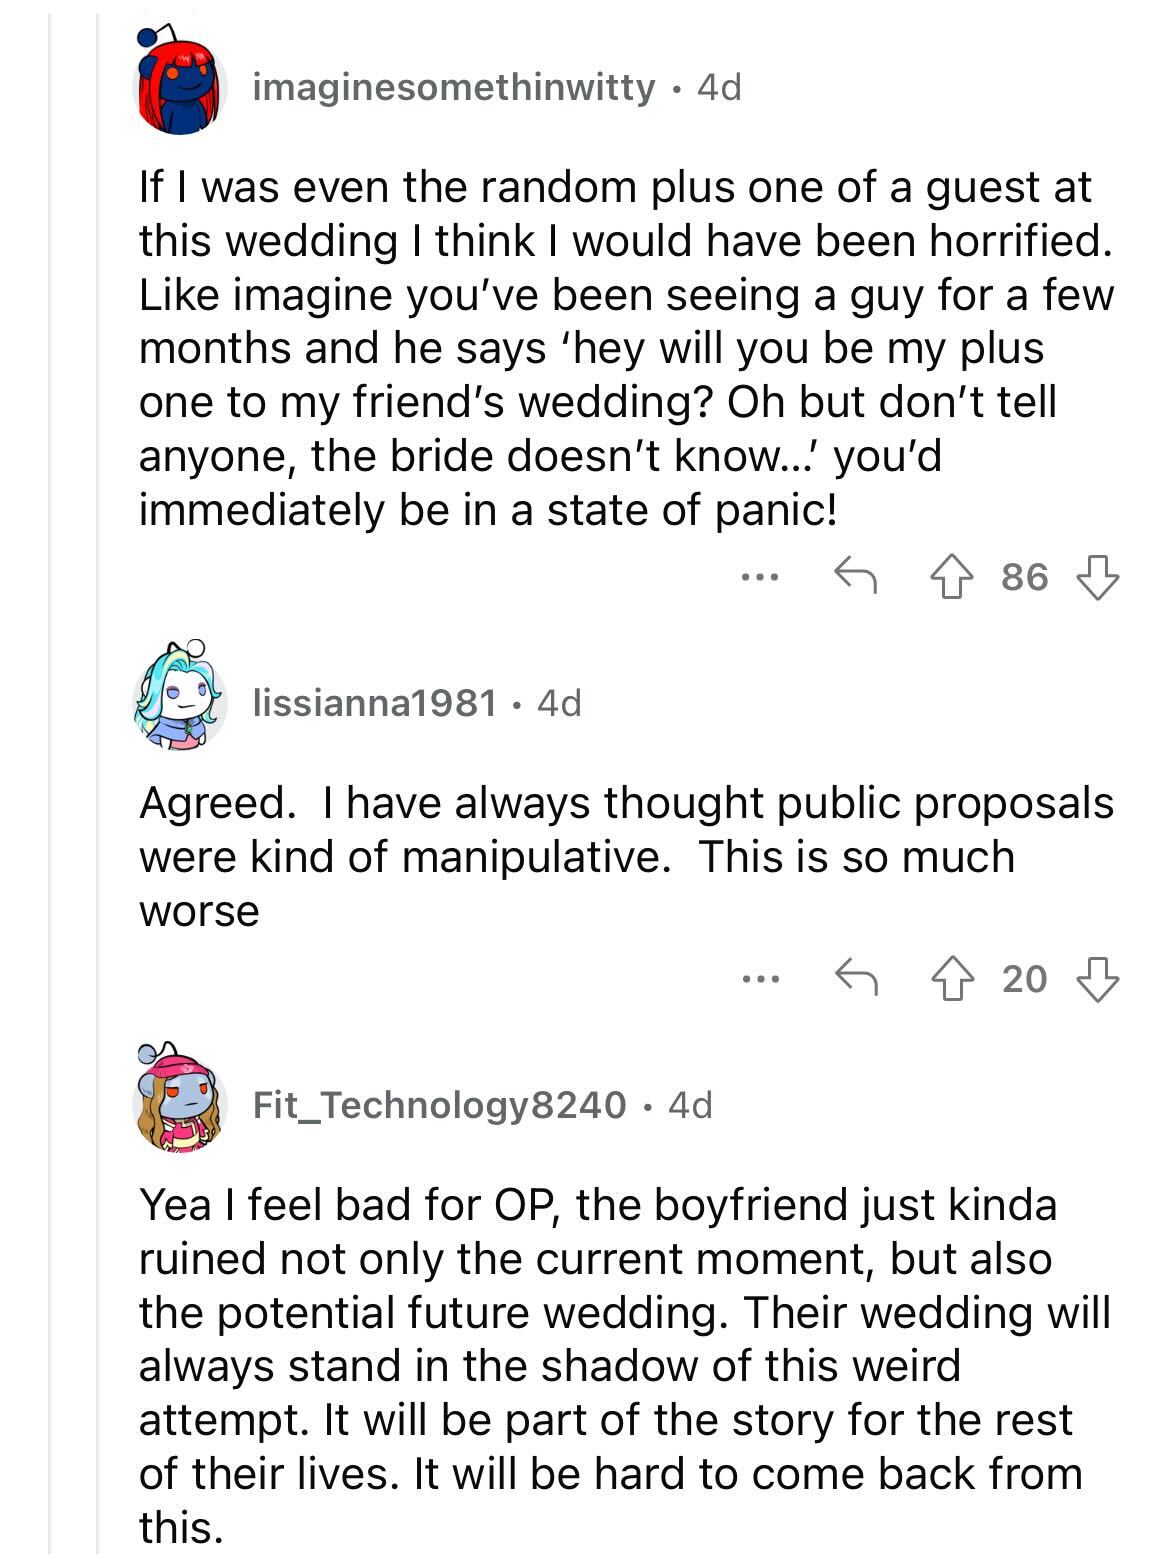 am i the asshole thread on reddit - paper - imaginesomethinwitty . 4d If I was even the random plus one of a guest at this wedding I think I would have been horrified. imagine you've been seeing a guy for a few months and he says 'hey will you be my plus 